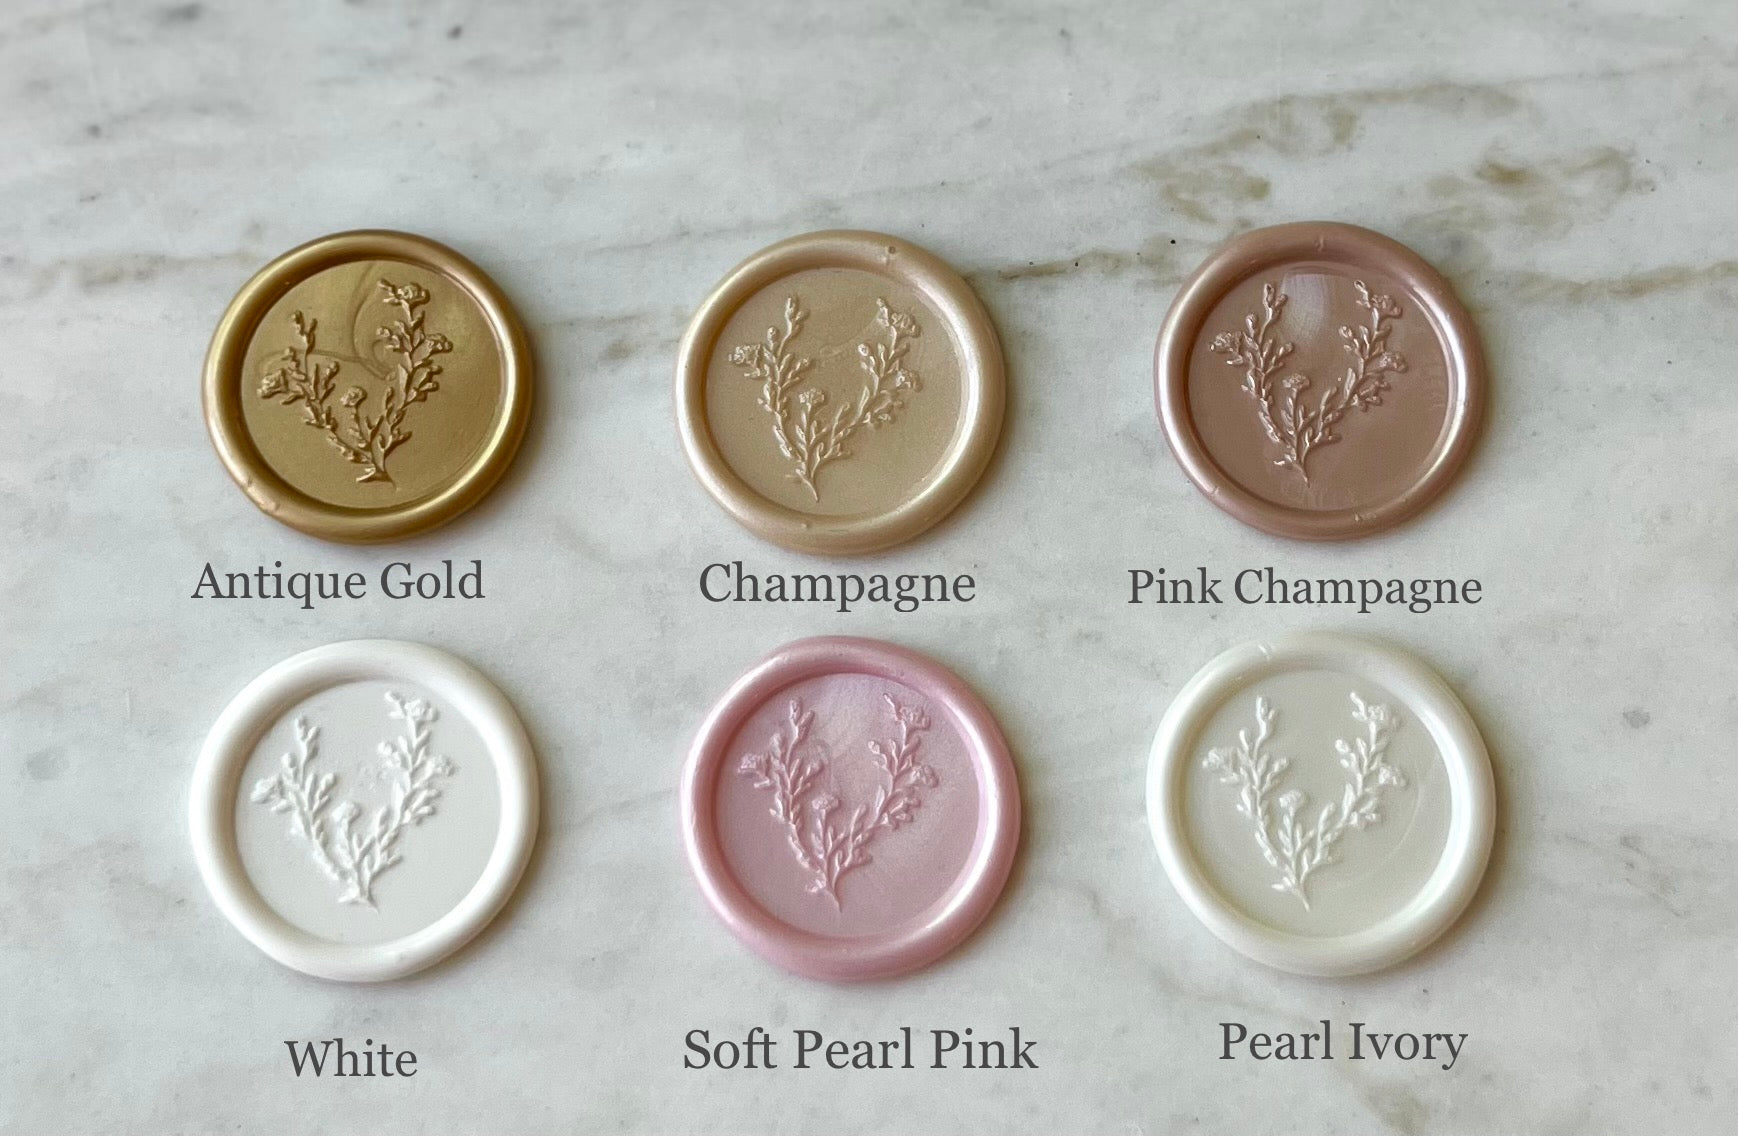 French Garden Wax Seal in Rose Gold Pack of 10 Marketplace Wax Seals by  undefined